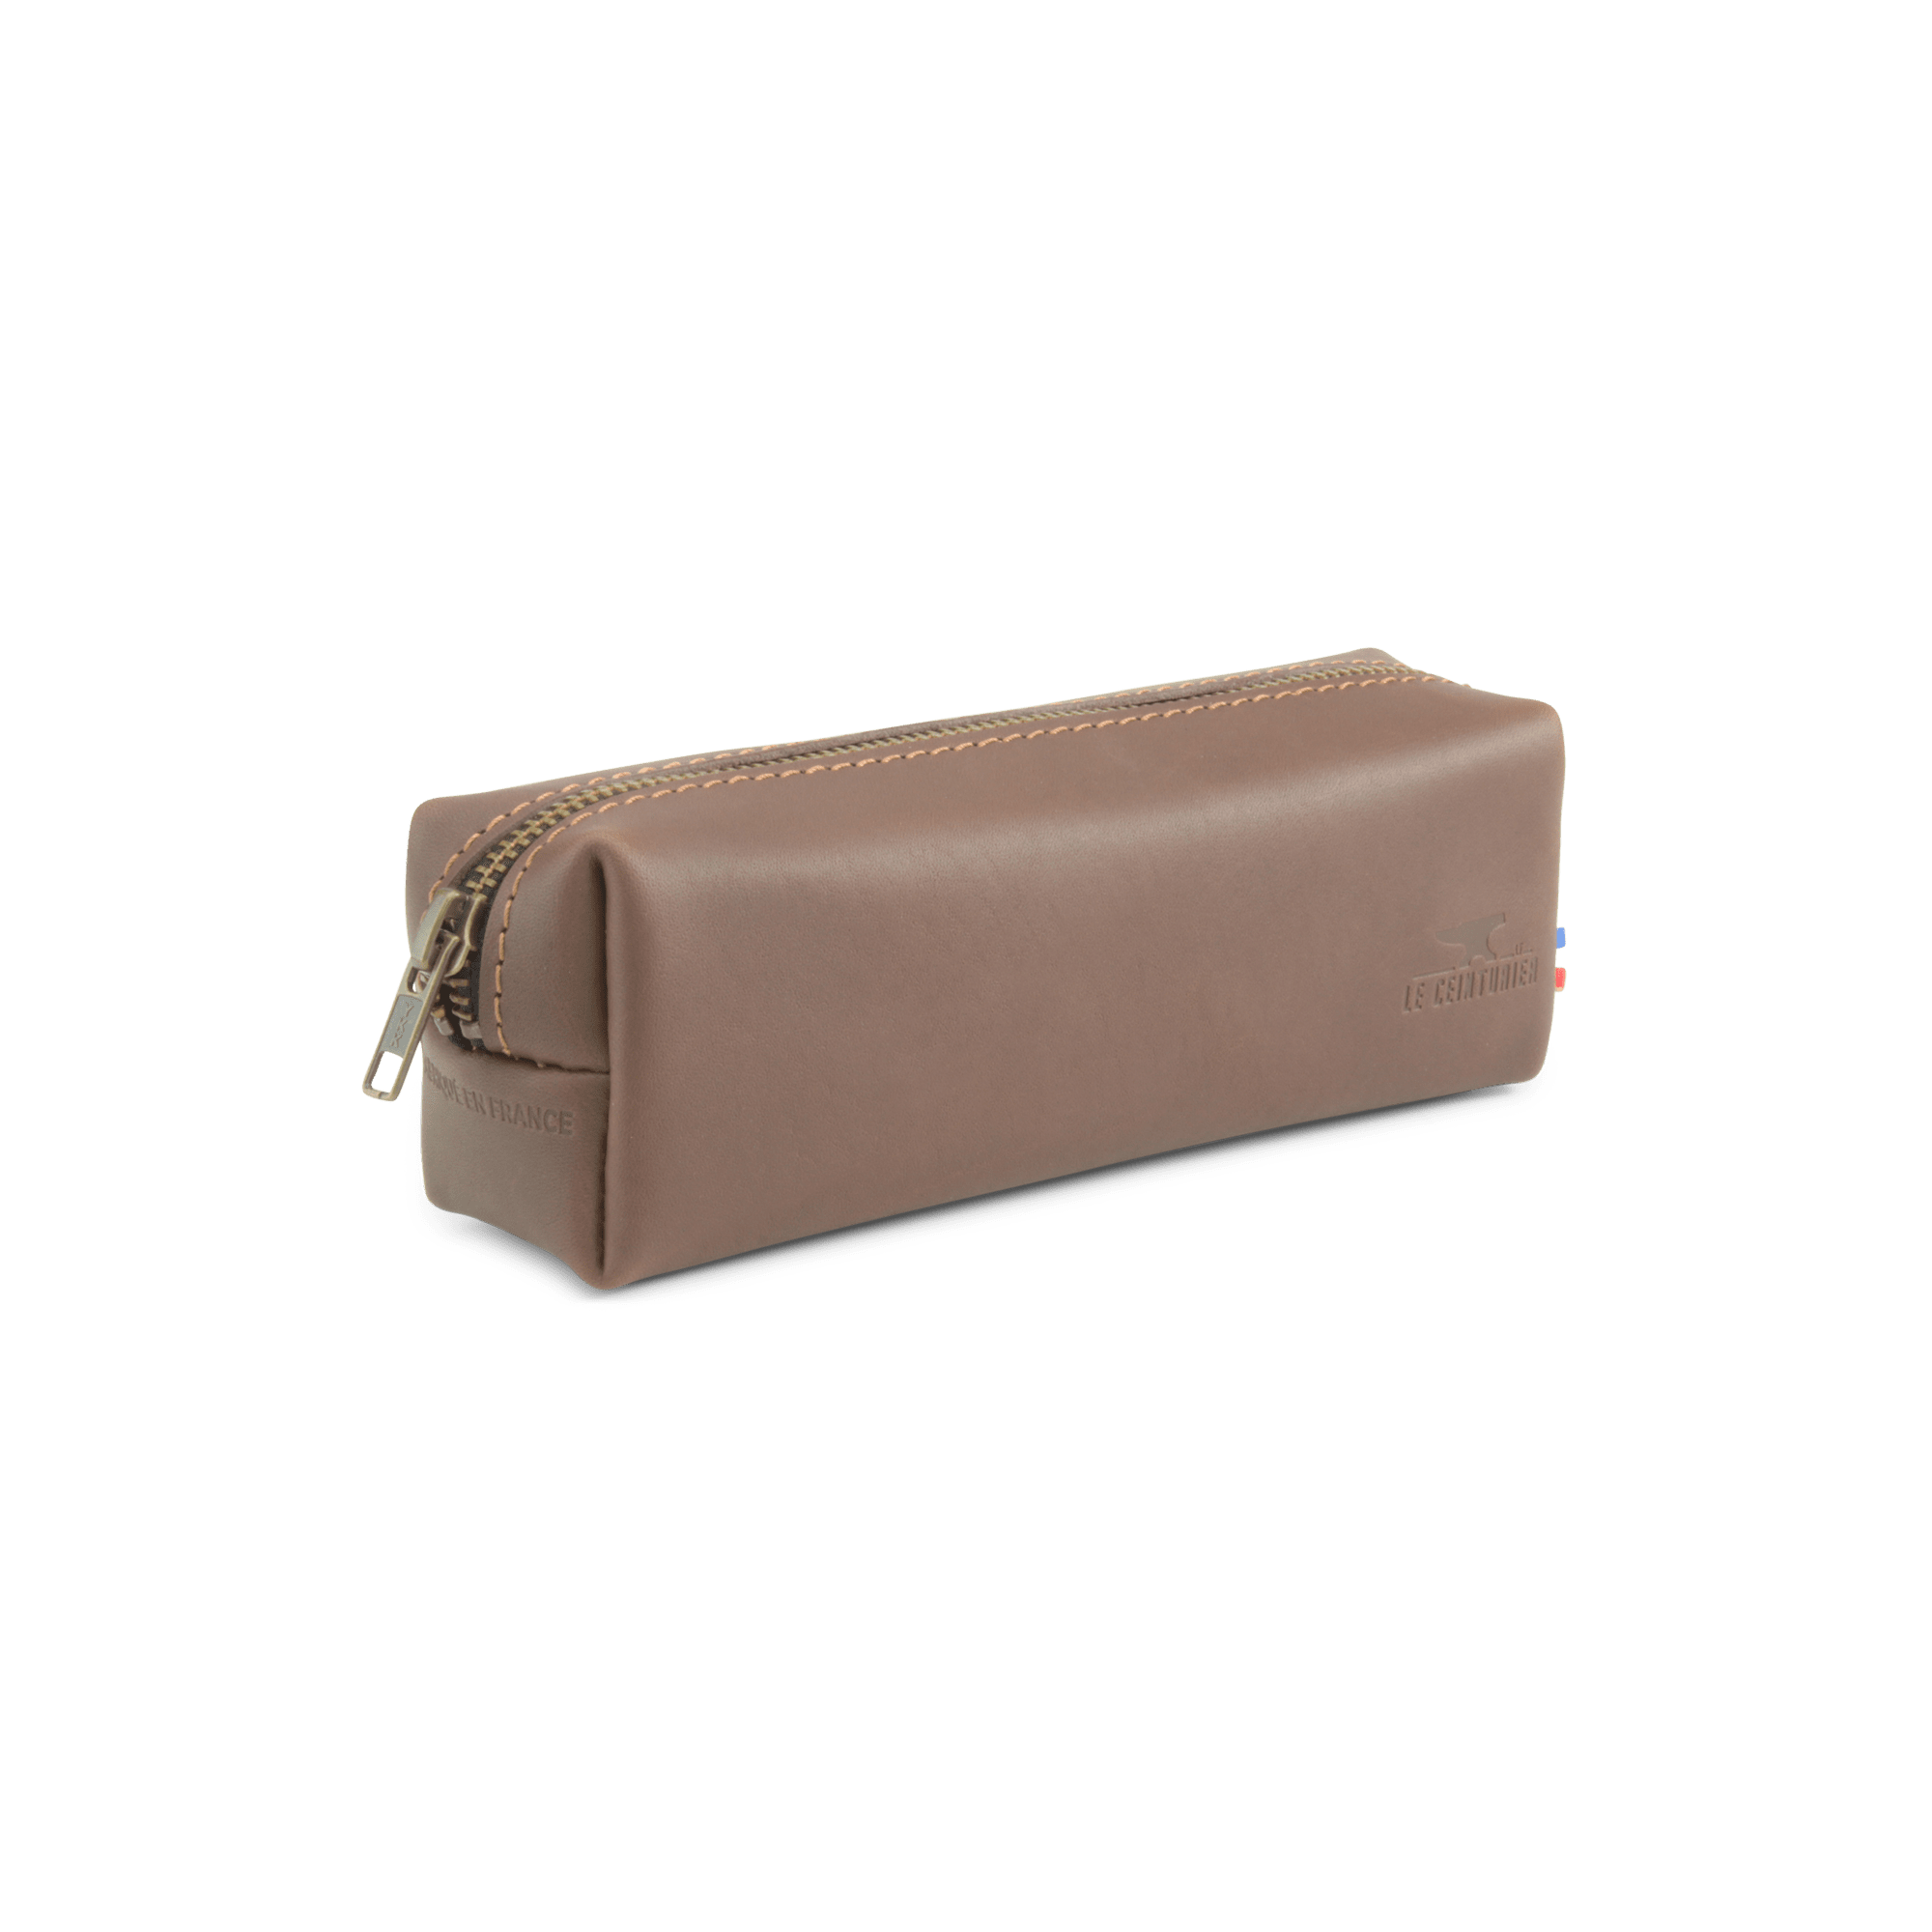 TROUSSE cuir - Maroquinerie Made In France - LE CEINTURIER